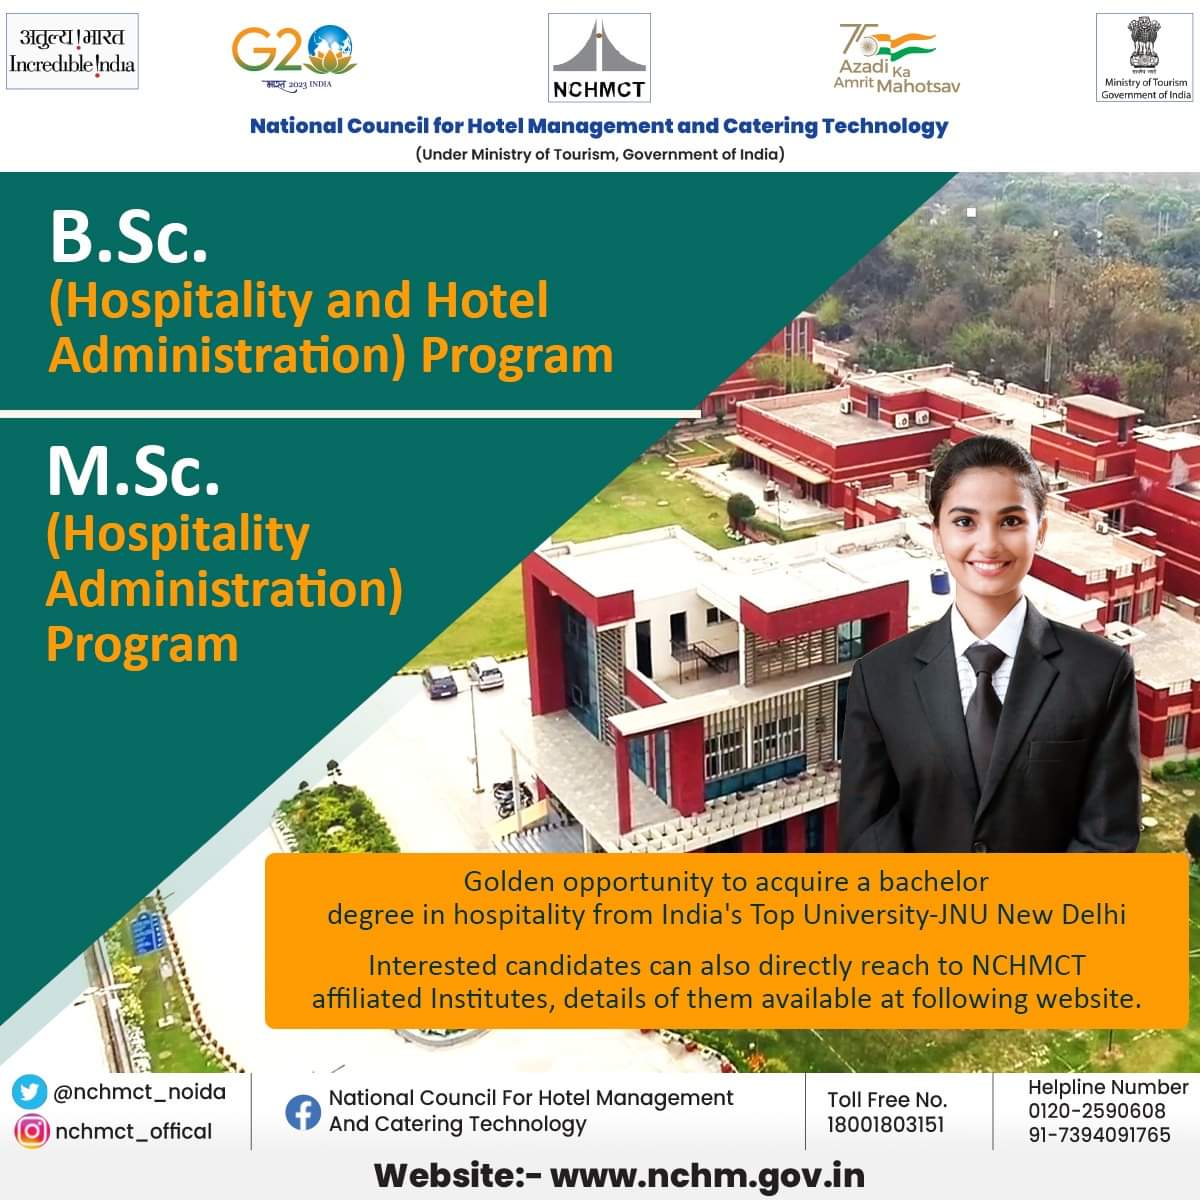 Unlock a Golden Opportunity! Pursue a Bachelor's in Hospitality from India's Premier University - JNU, New Delhi. 

Elevate your career in tourism with world-class education. Join the journey to excellence! 

#TourismEducation #SkillDevelopment #HotelAdministration #NCHMCT